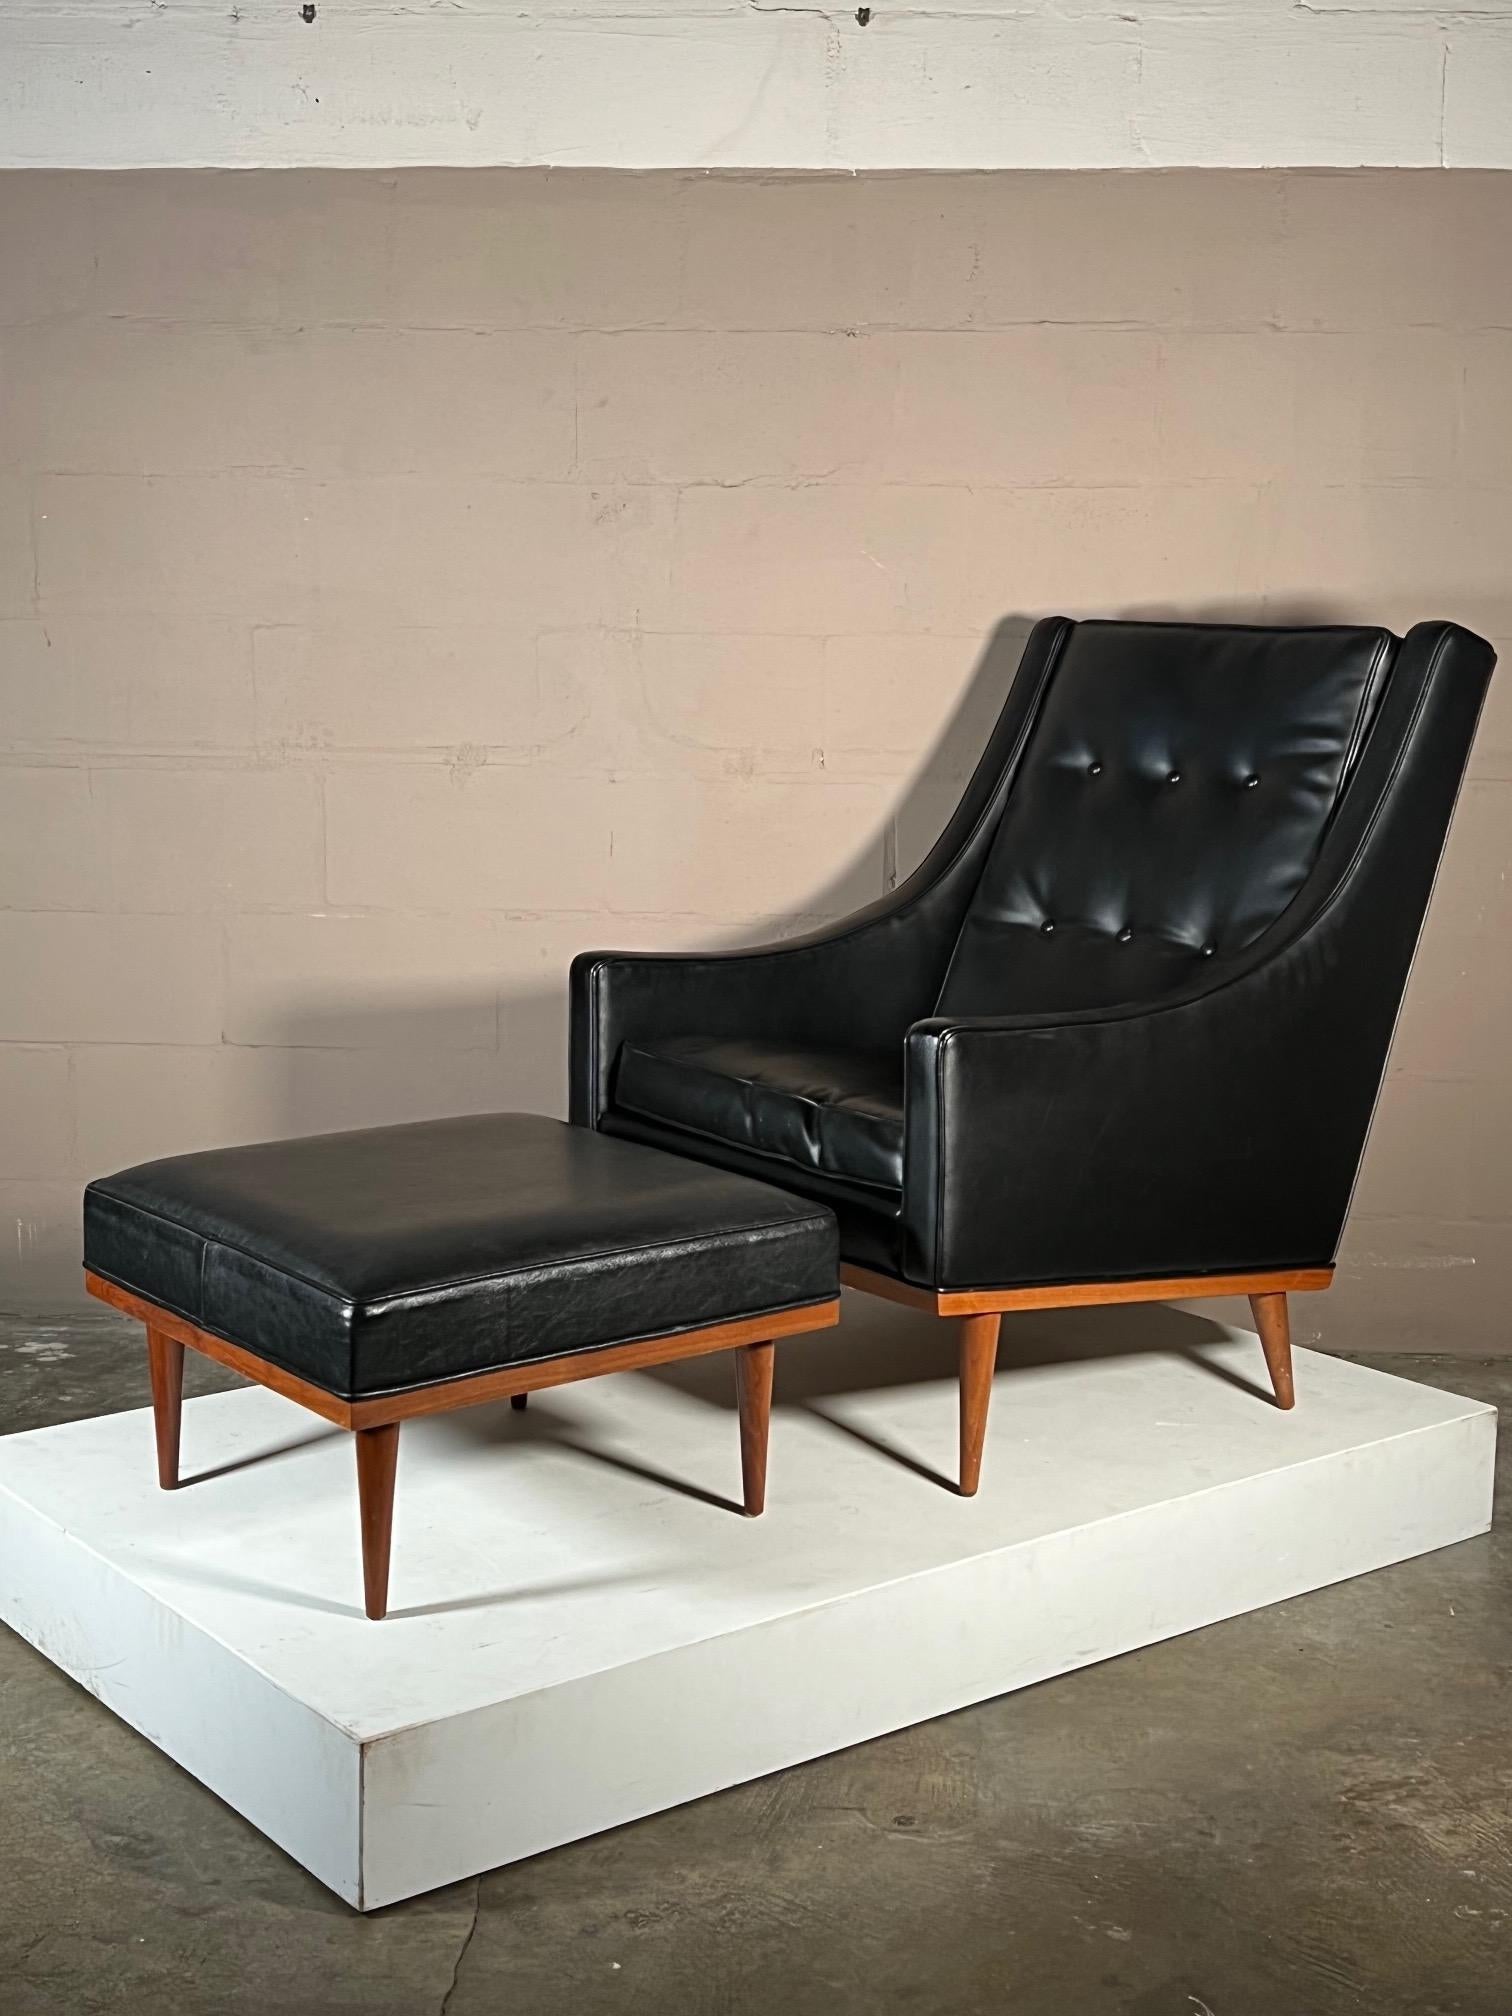 A classic high back lounge chair with matching ottoman. Designed by Milo Baughman for James Inc, High Point, NC. This chair is very comfortable and stylish at the same time. Beautiful walnut frame and original leatherette upholstery.